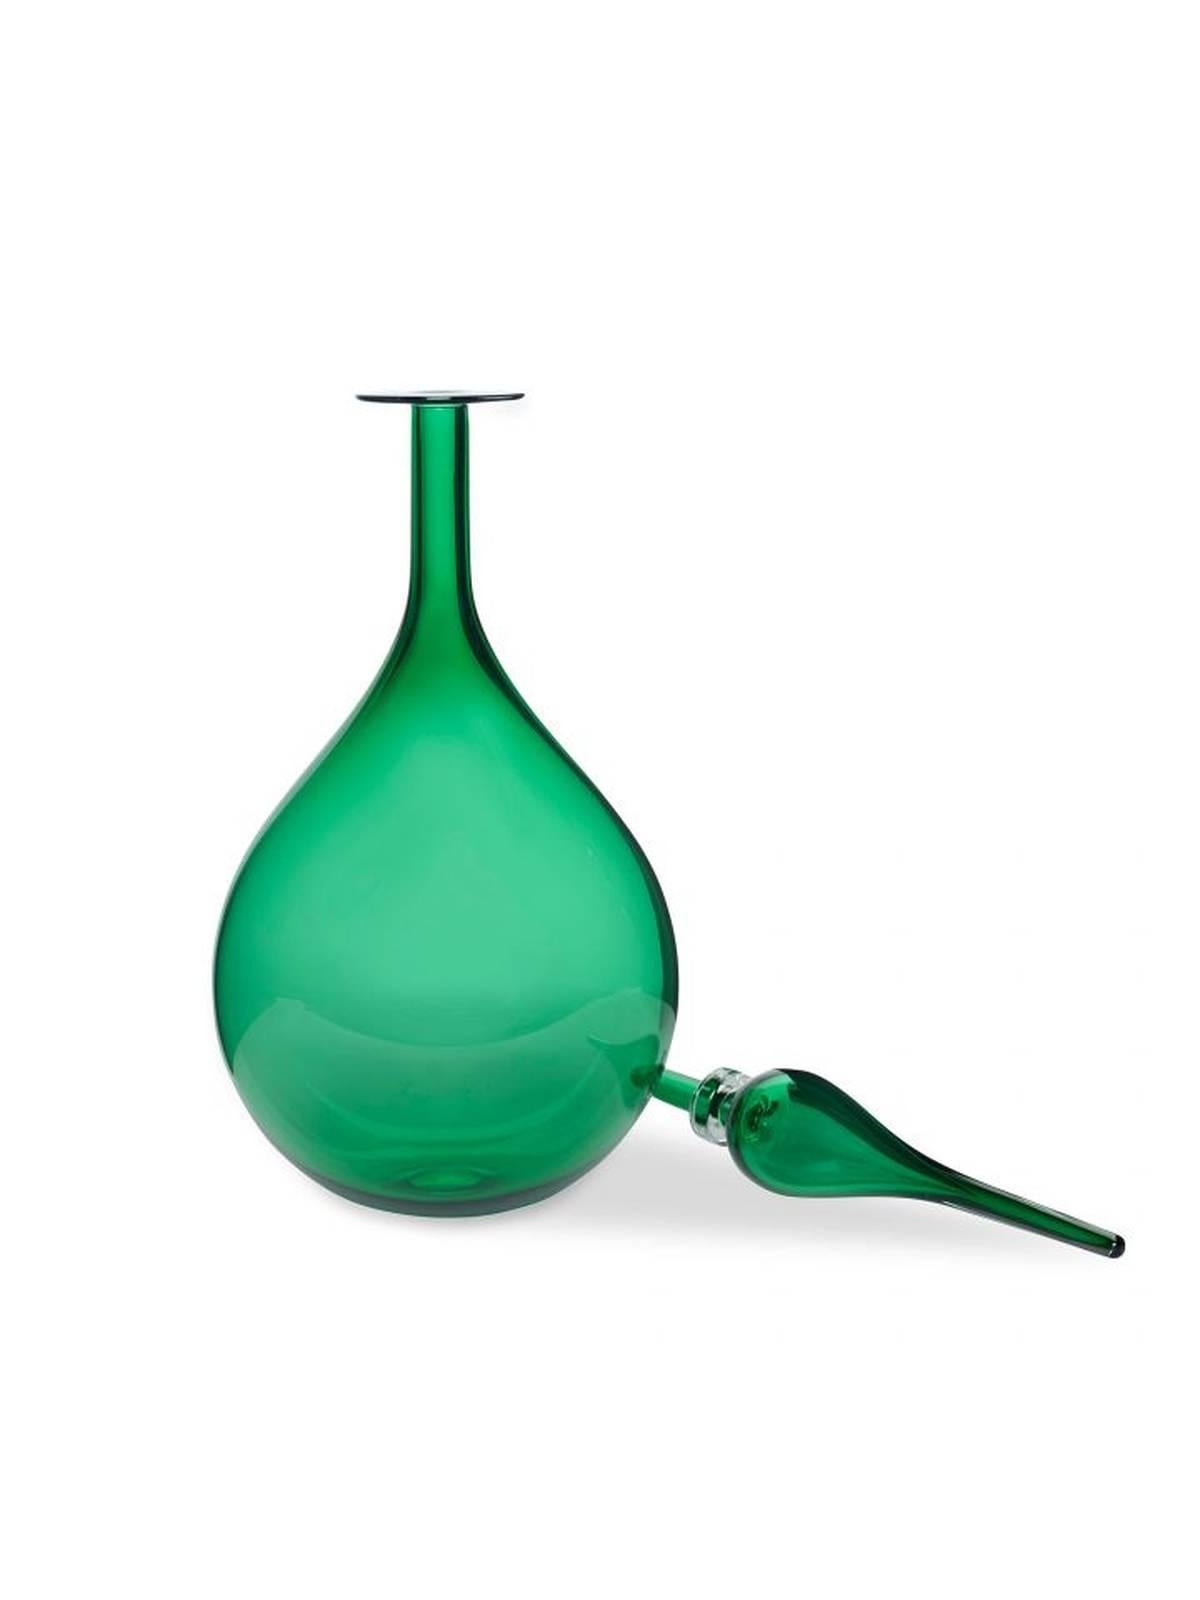 The petite tear drop decanter by Joe Cariati features a rounded, tear drop shaped body and is detailed with a decorative glass stopper. Inspired by Mid-Century classics, handmade in LA.